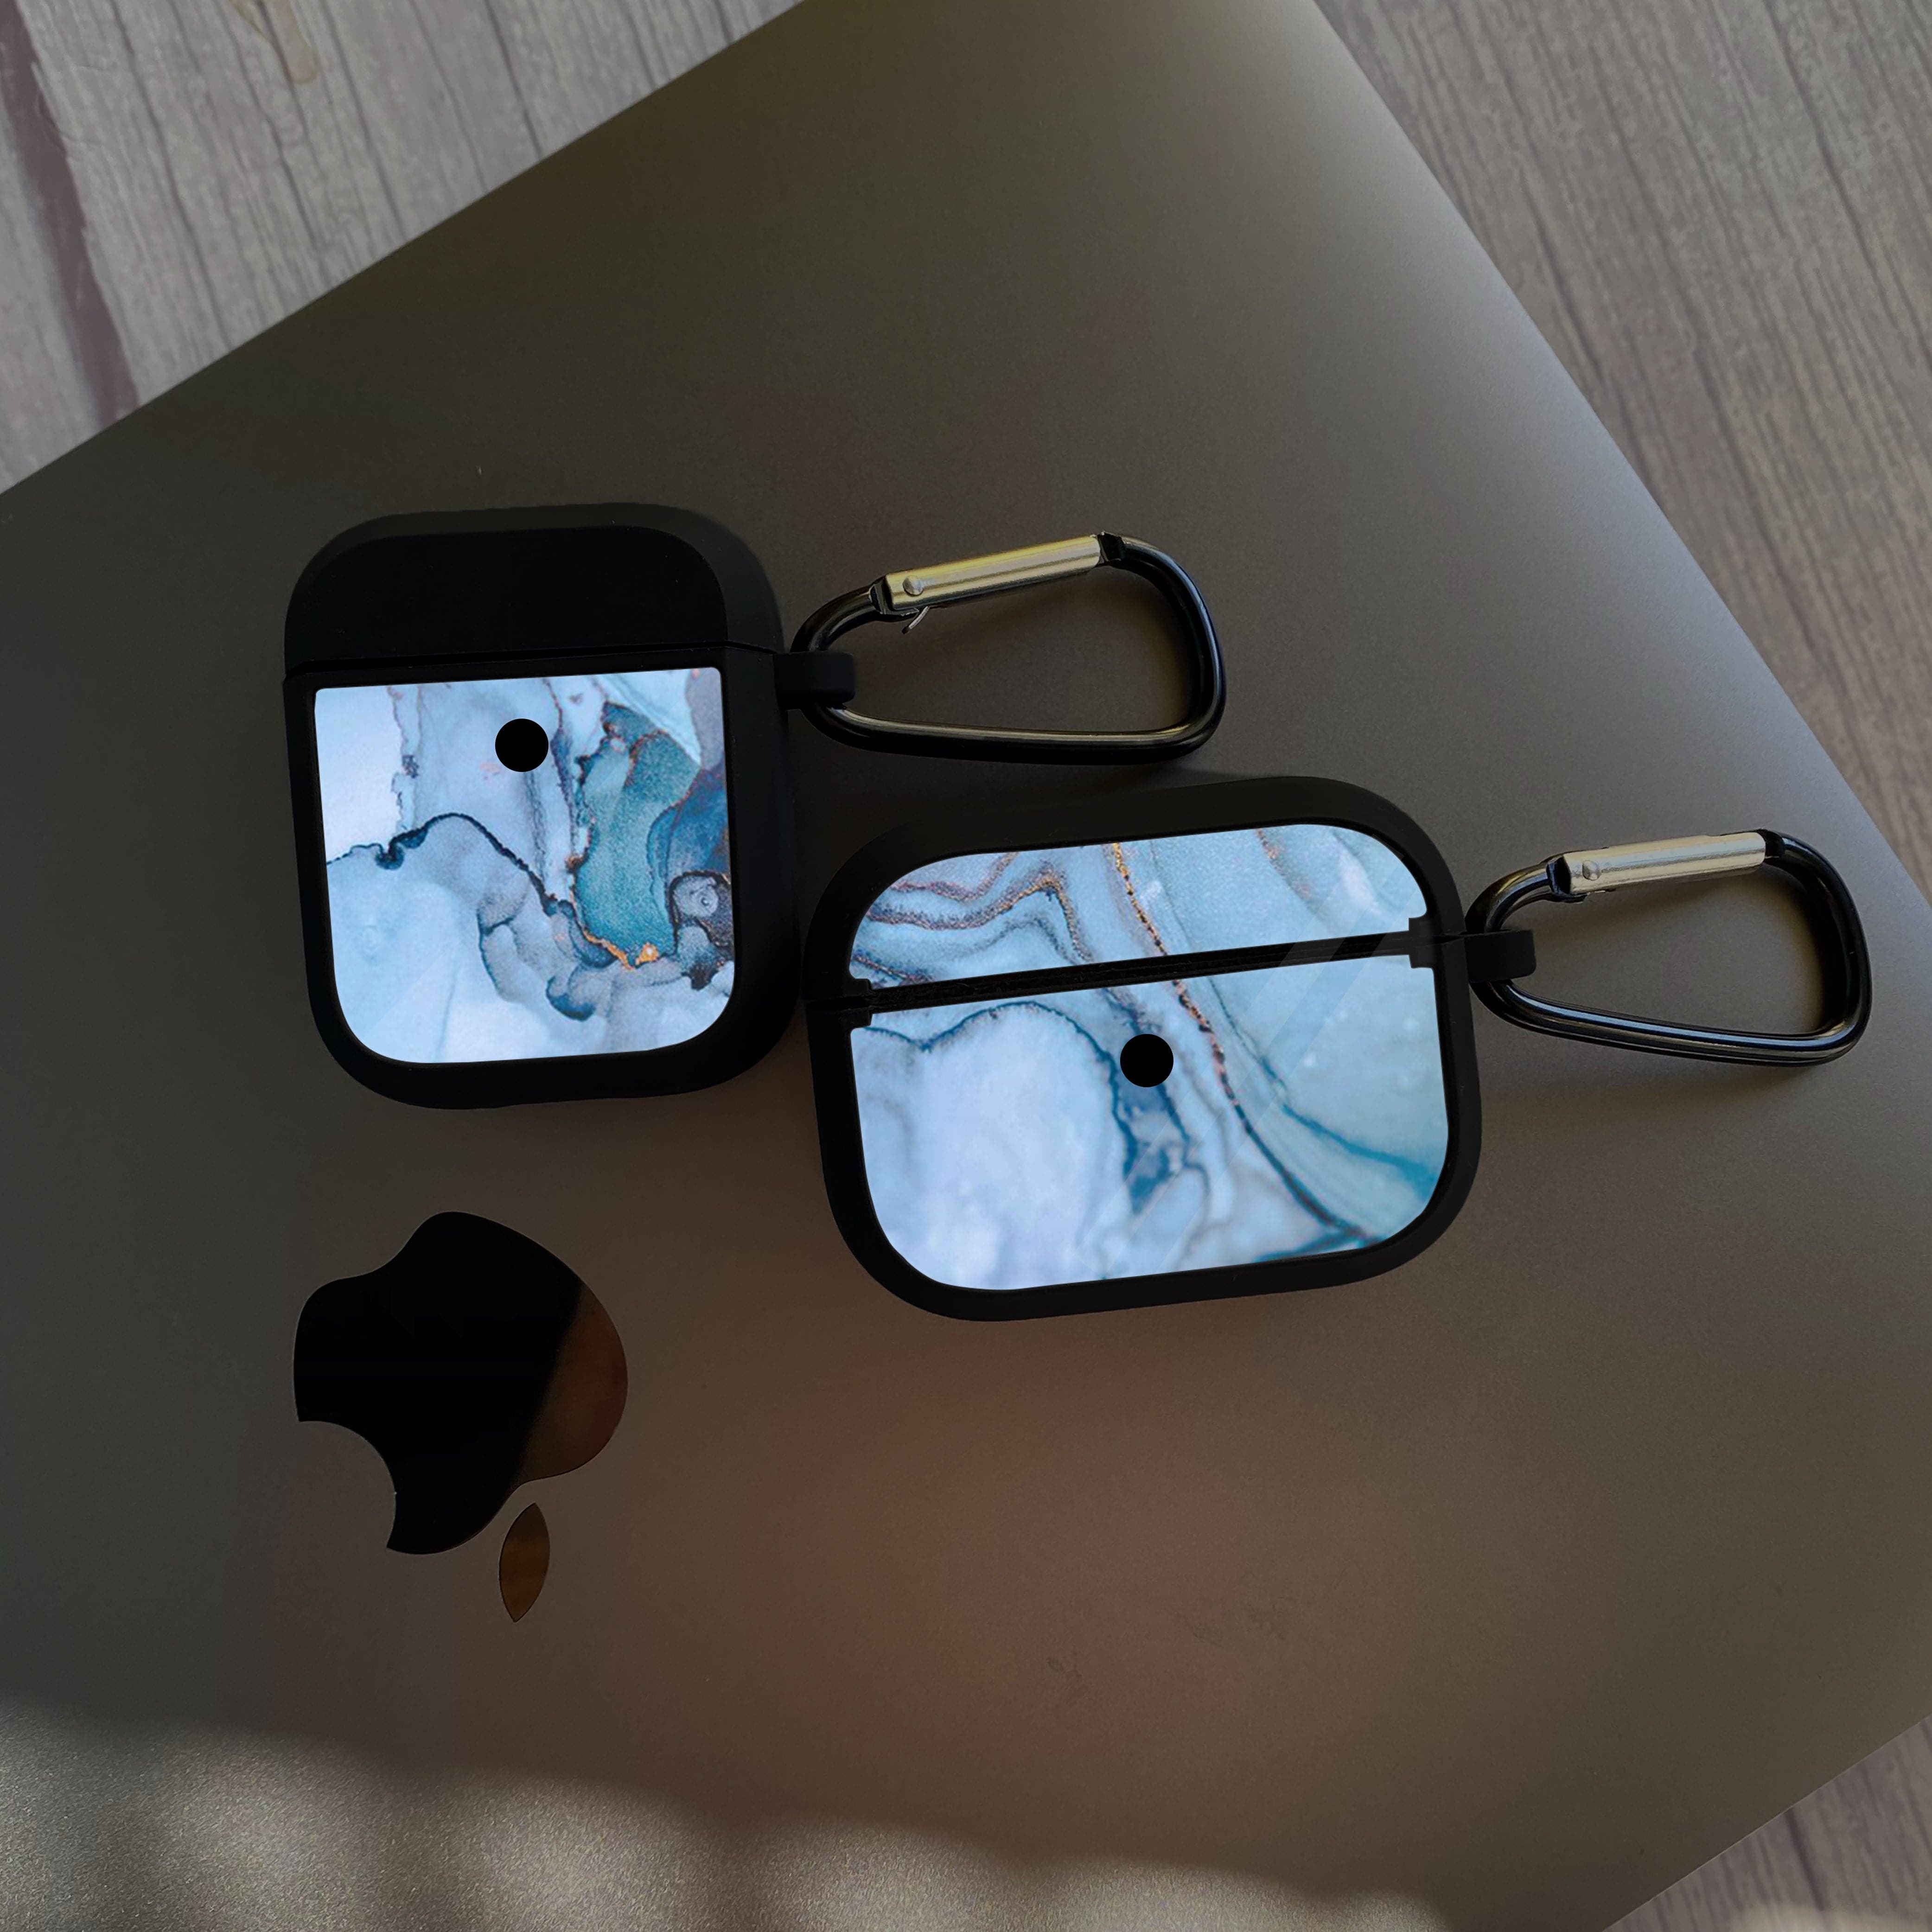 Apple Airpods Case - Blue Marble Series 01 - Premium Print with holding clip